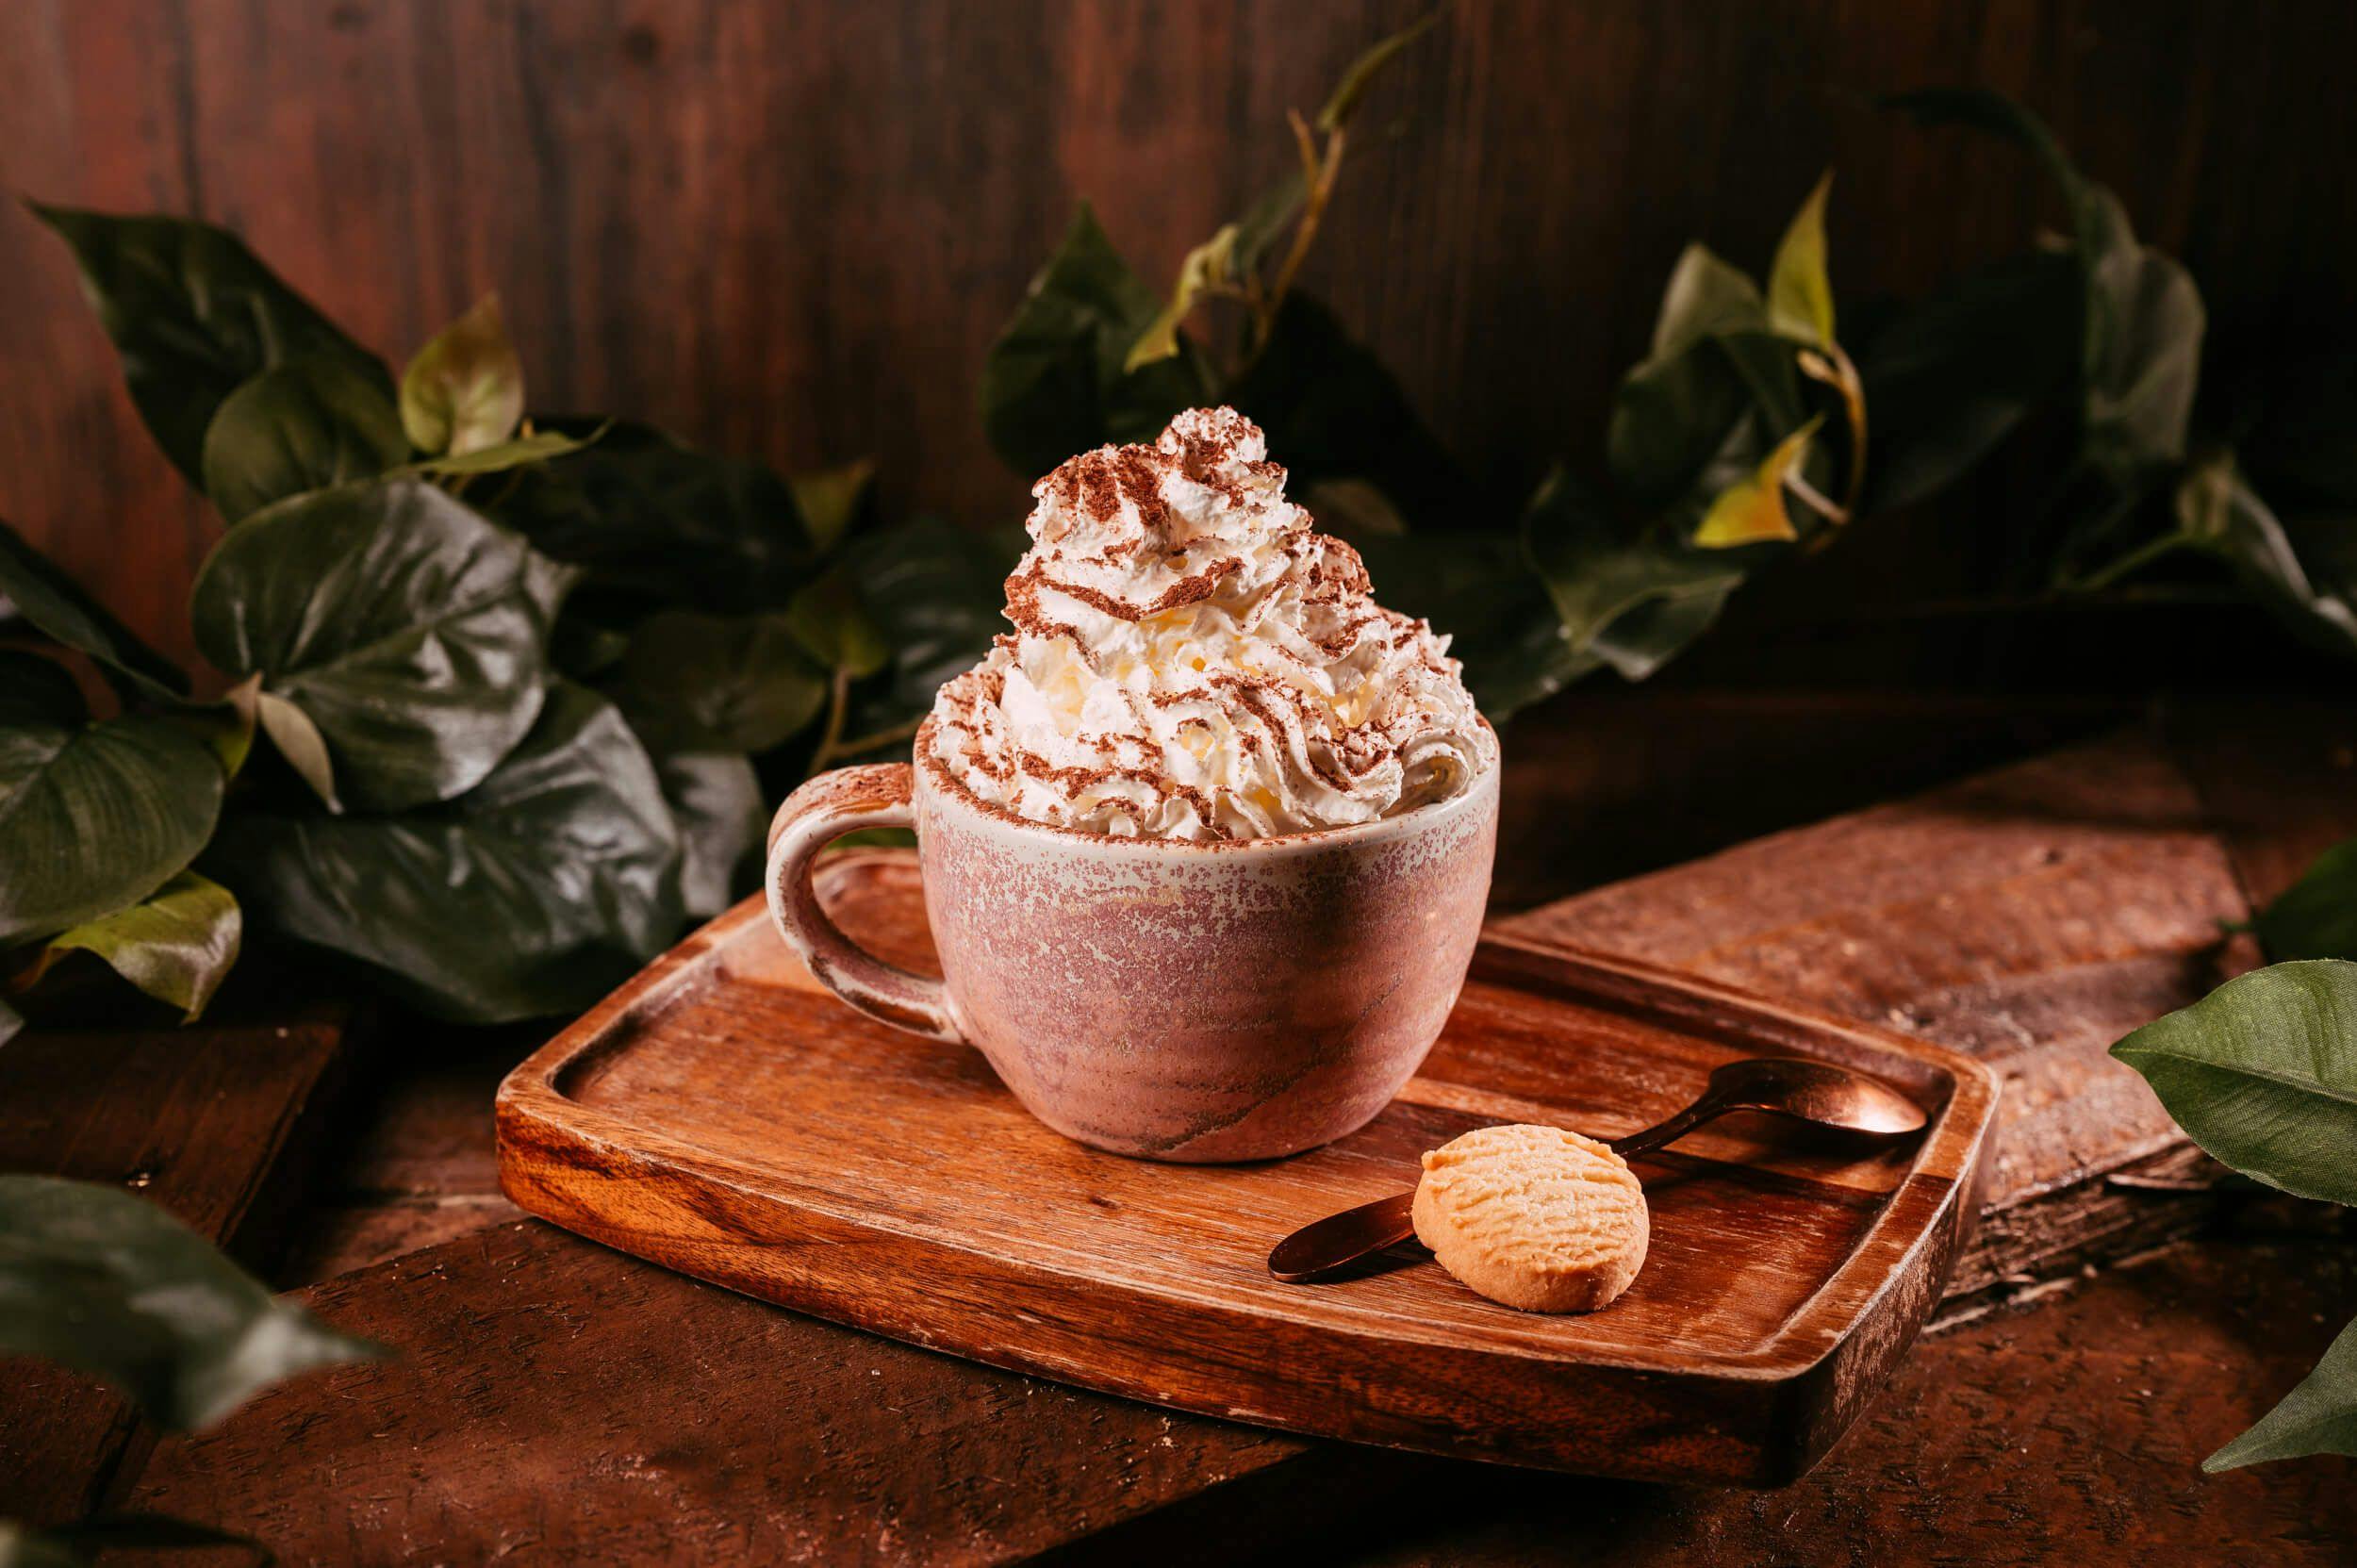 Image of a decadent hot chocolate covered in whip cream with a small biscuit on a wooden tray.